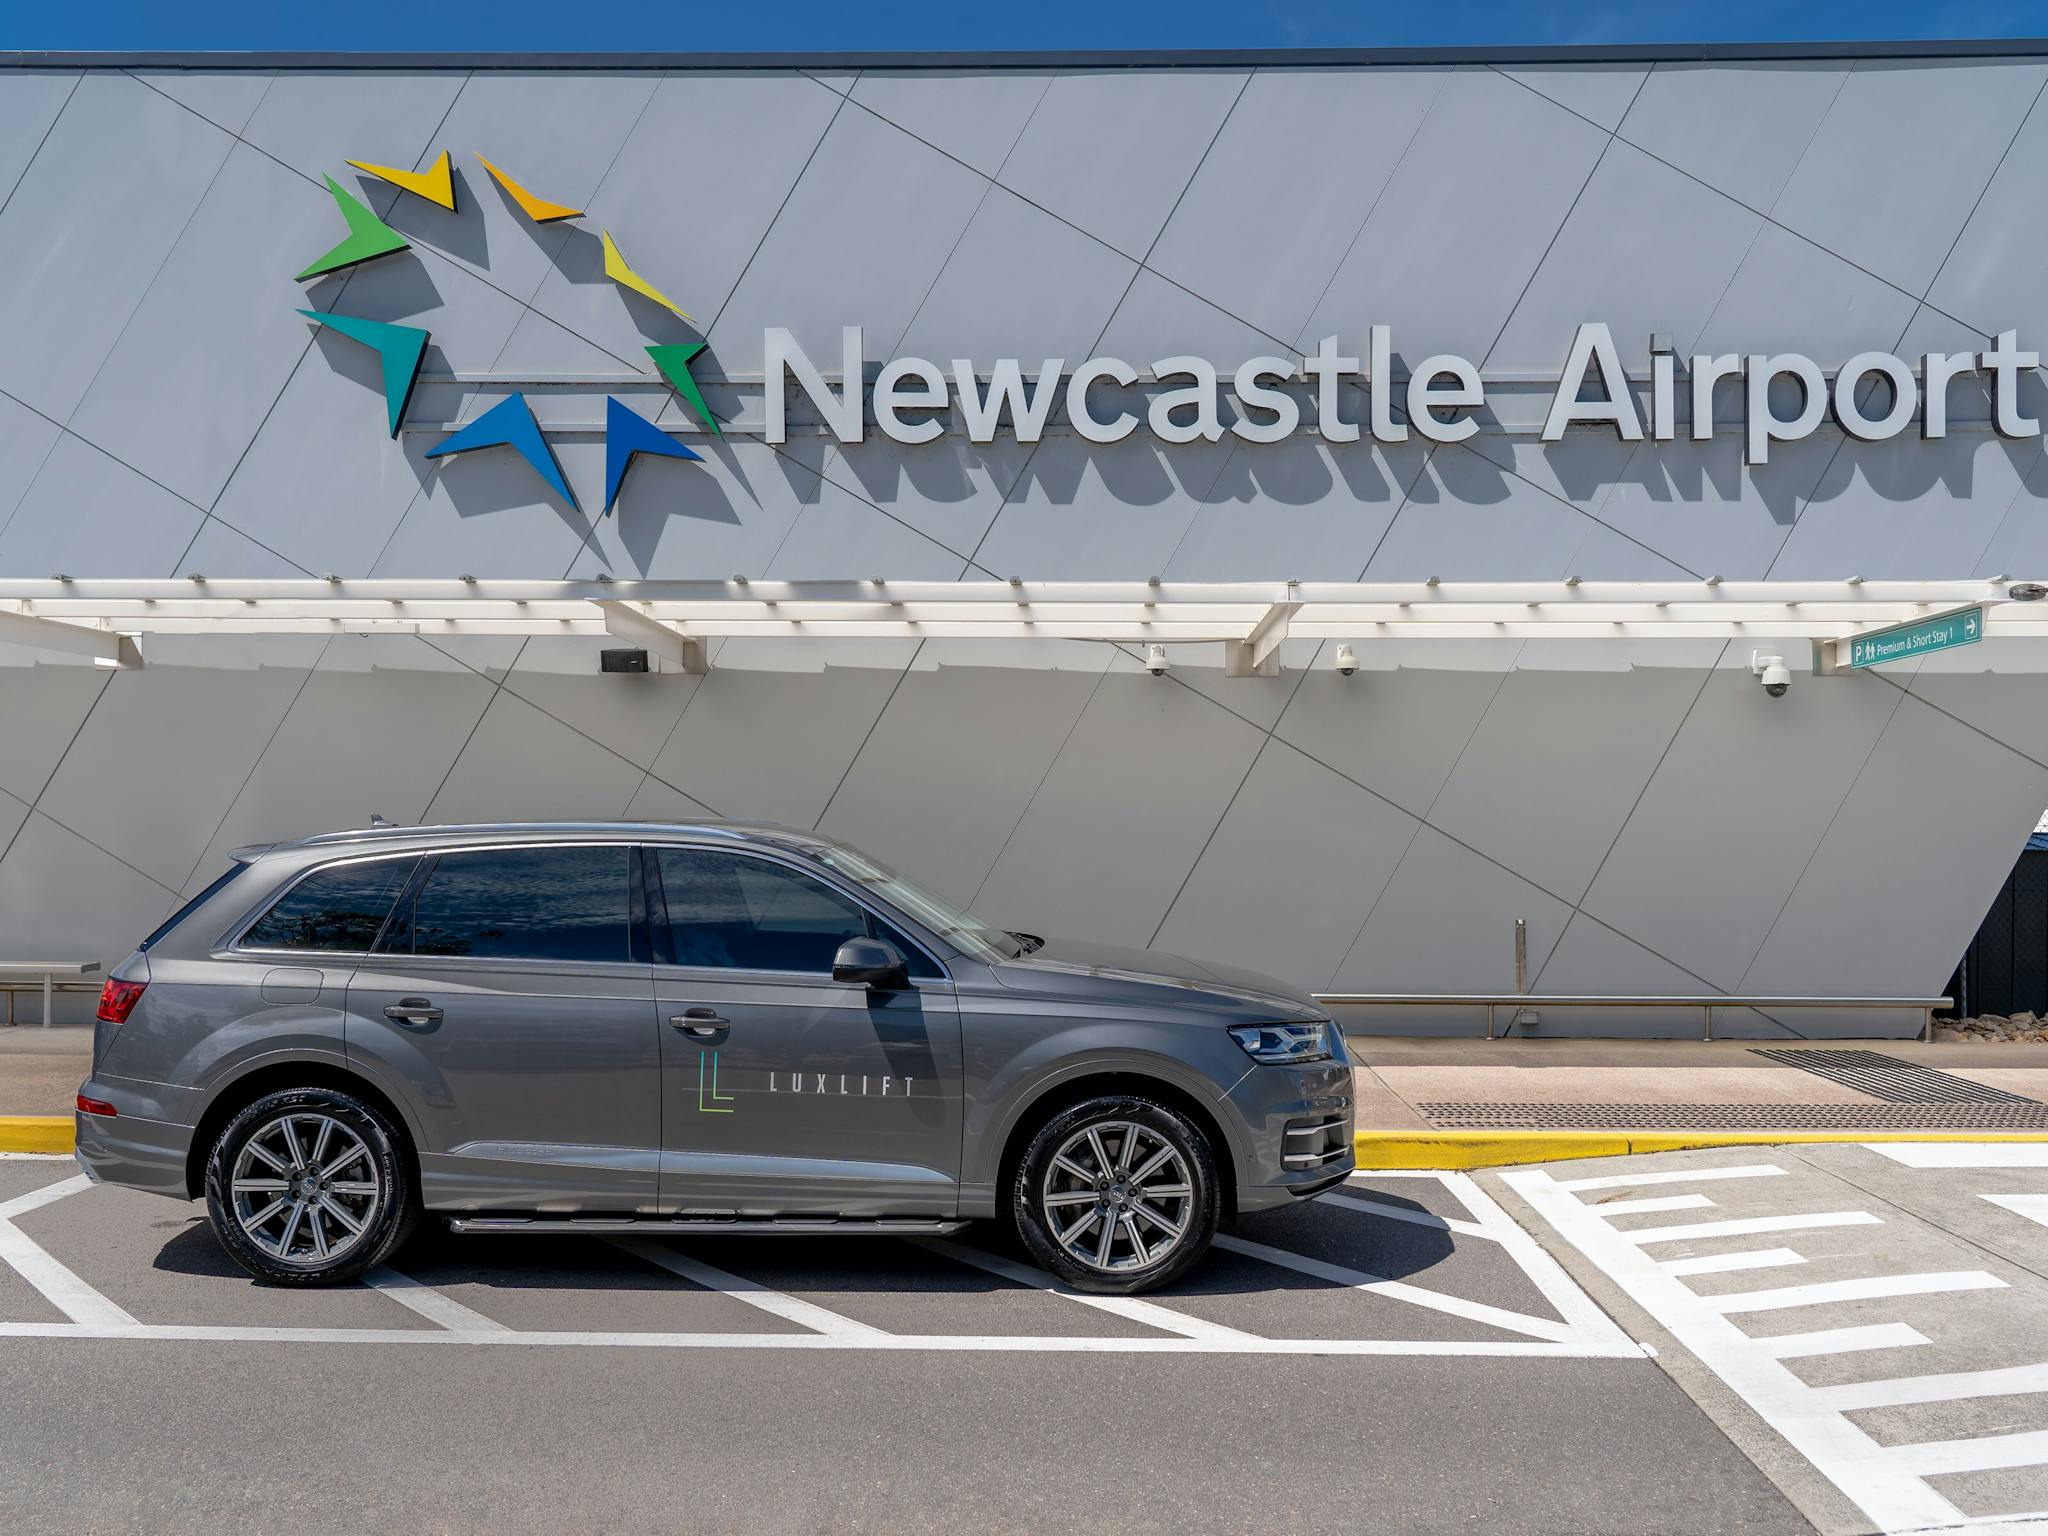 Luxlift Airport Transfers